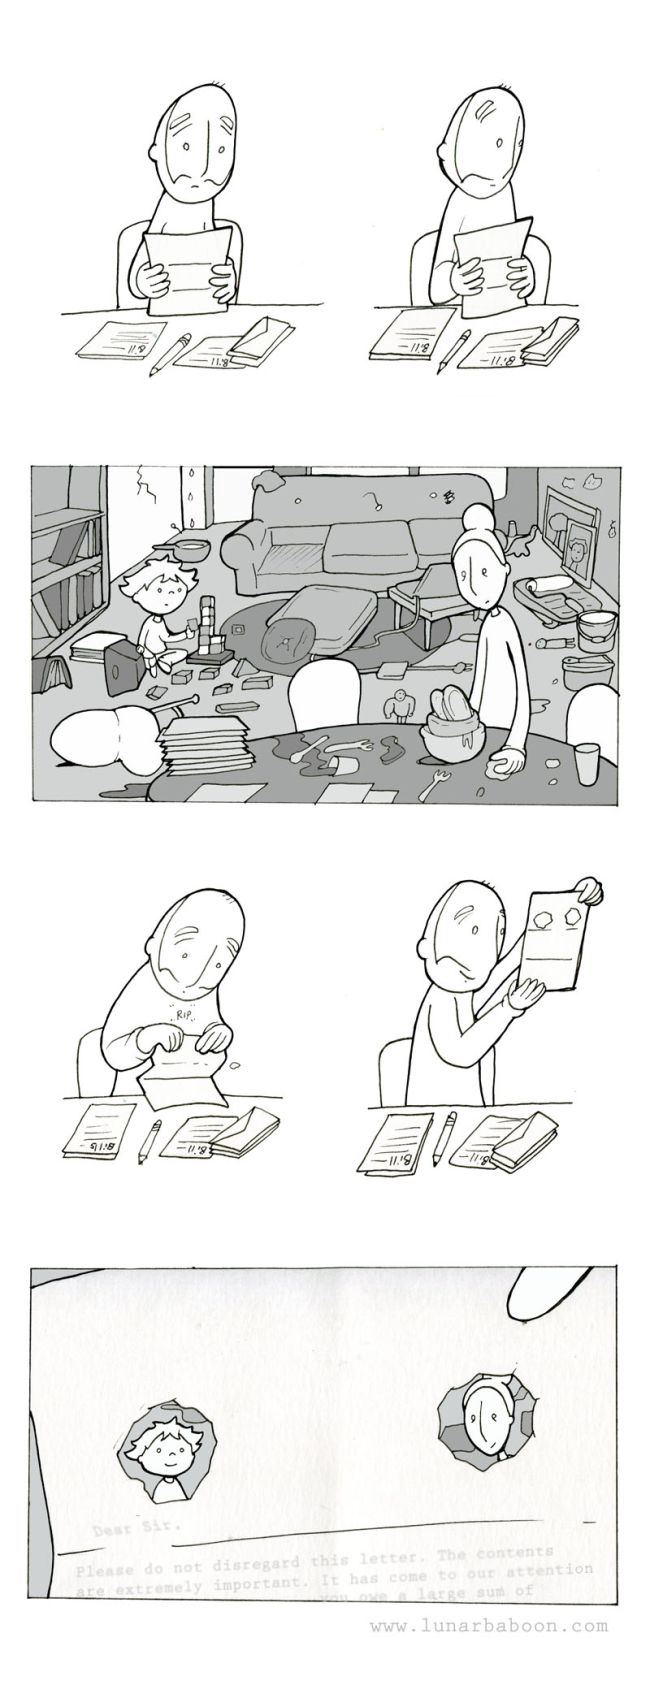 Lunarbaboon Comix